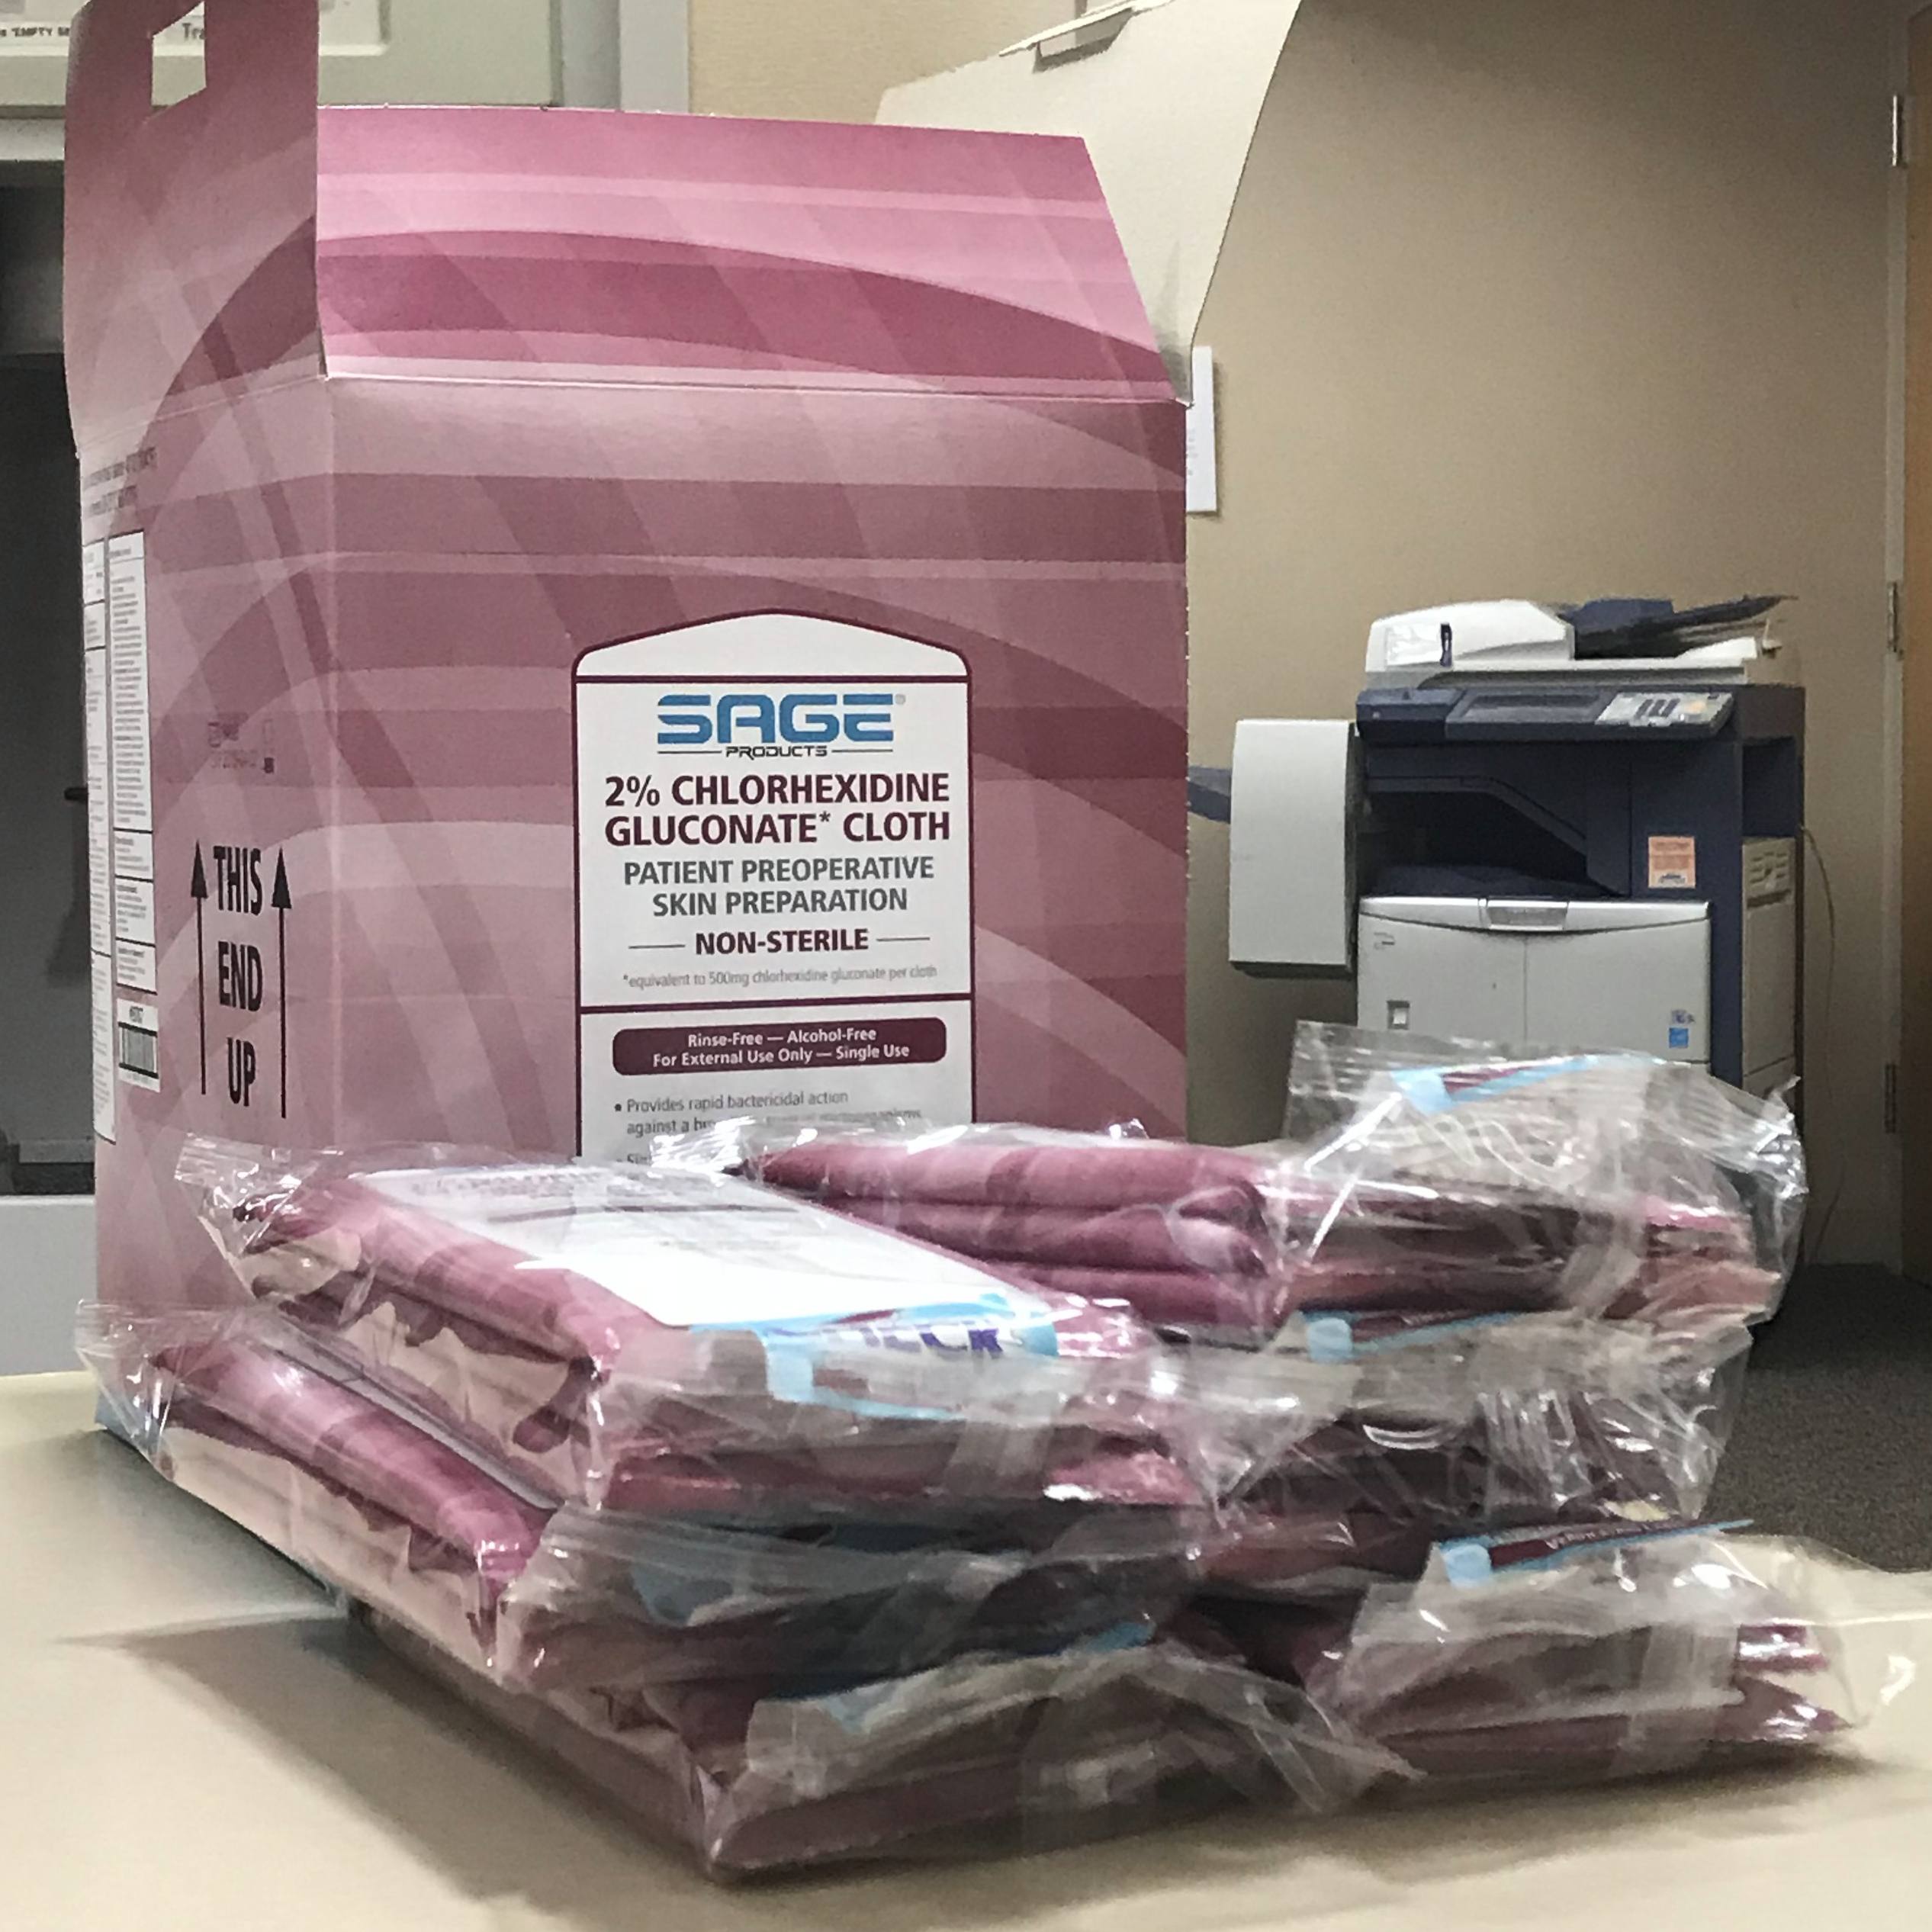 boxes of sterile cloth being unloaded at Saint Marys Hospital 